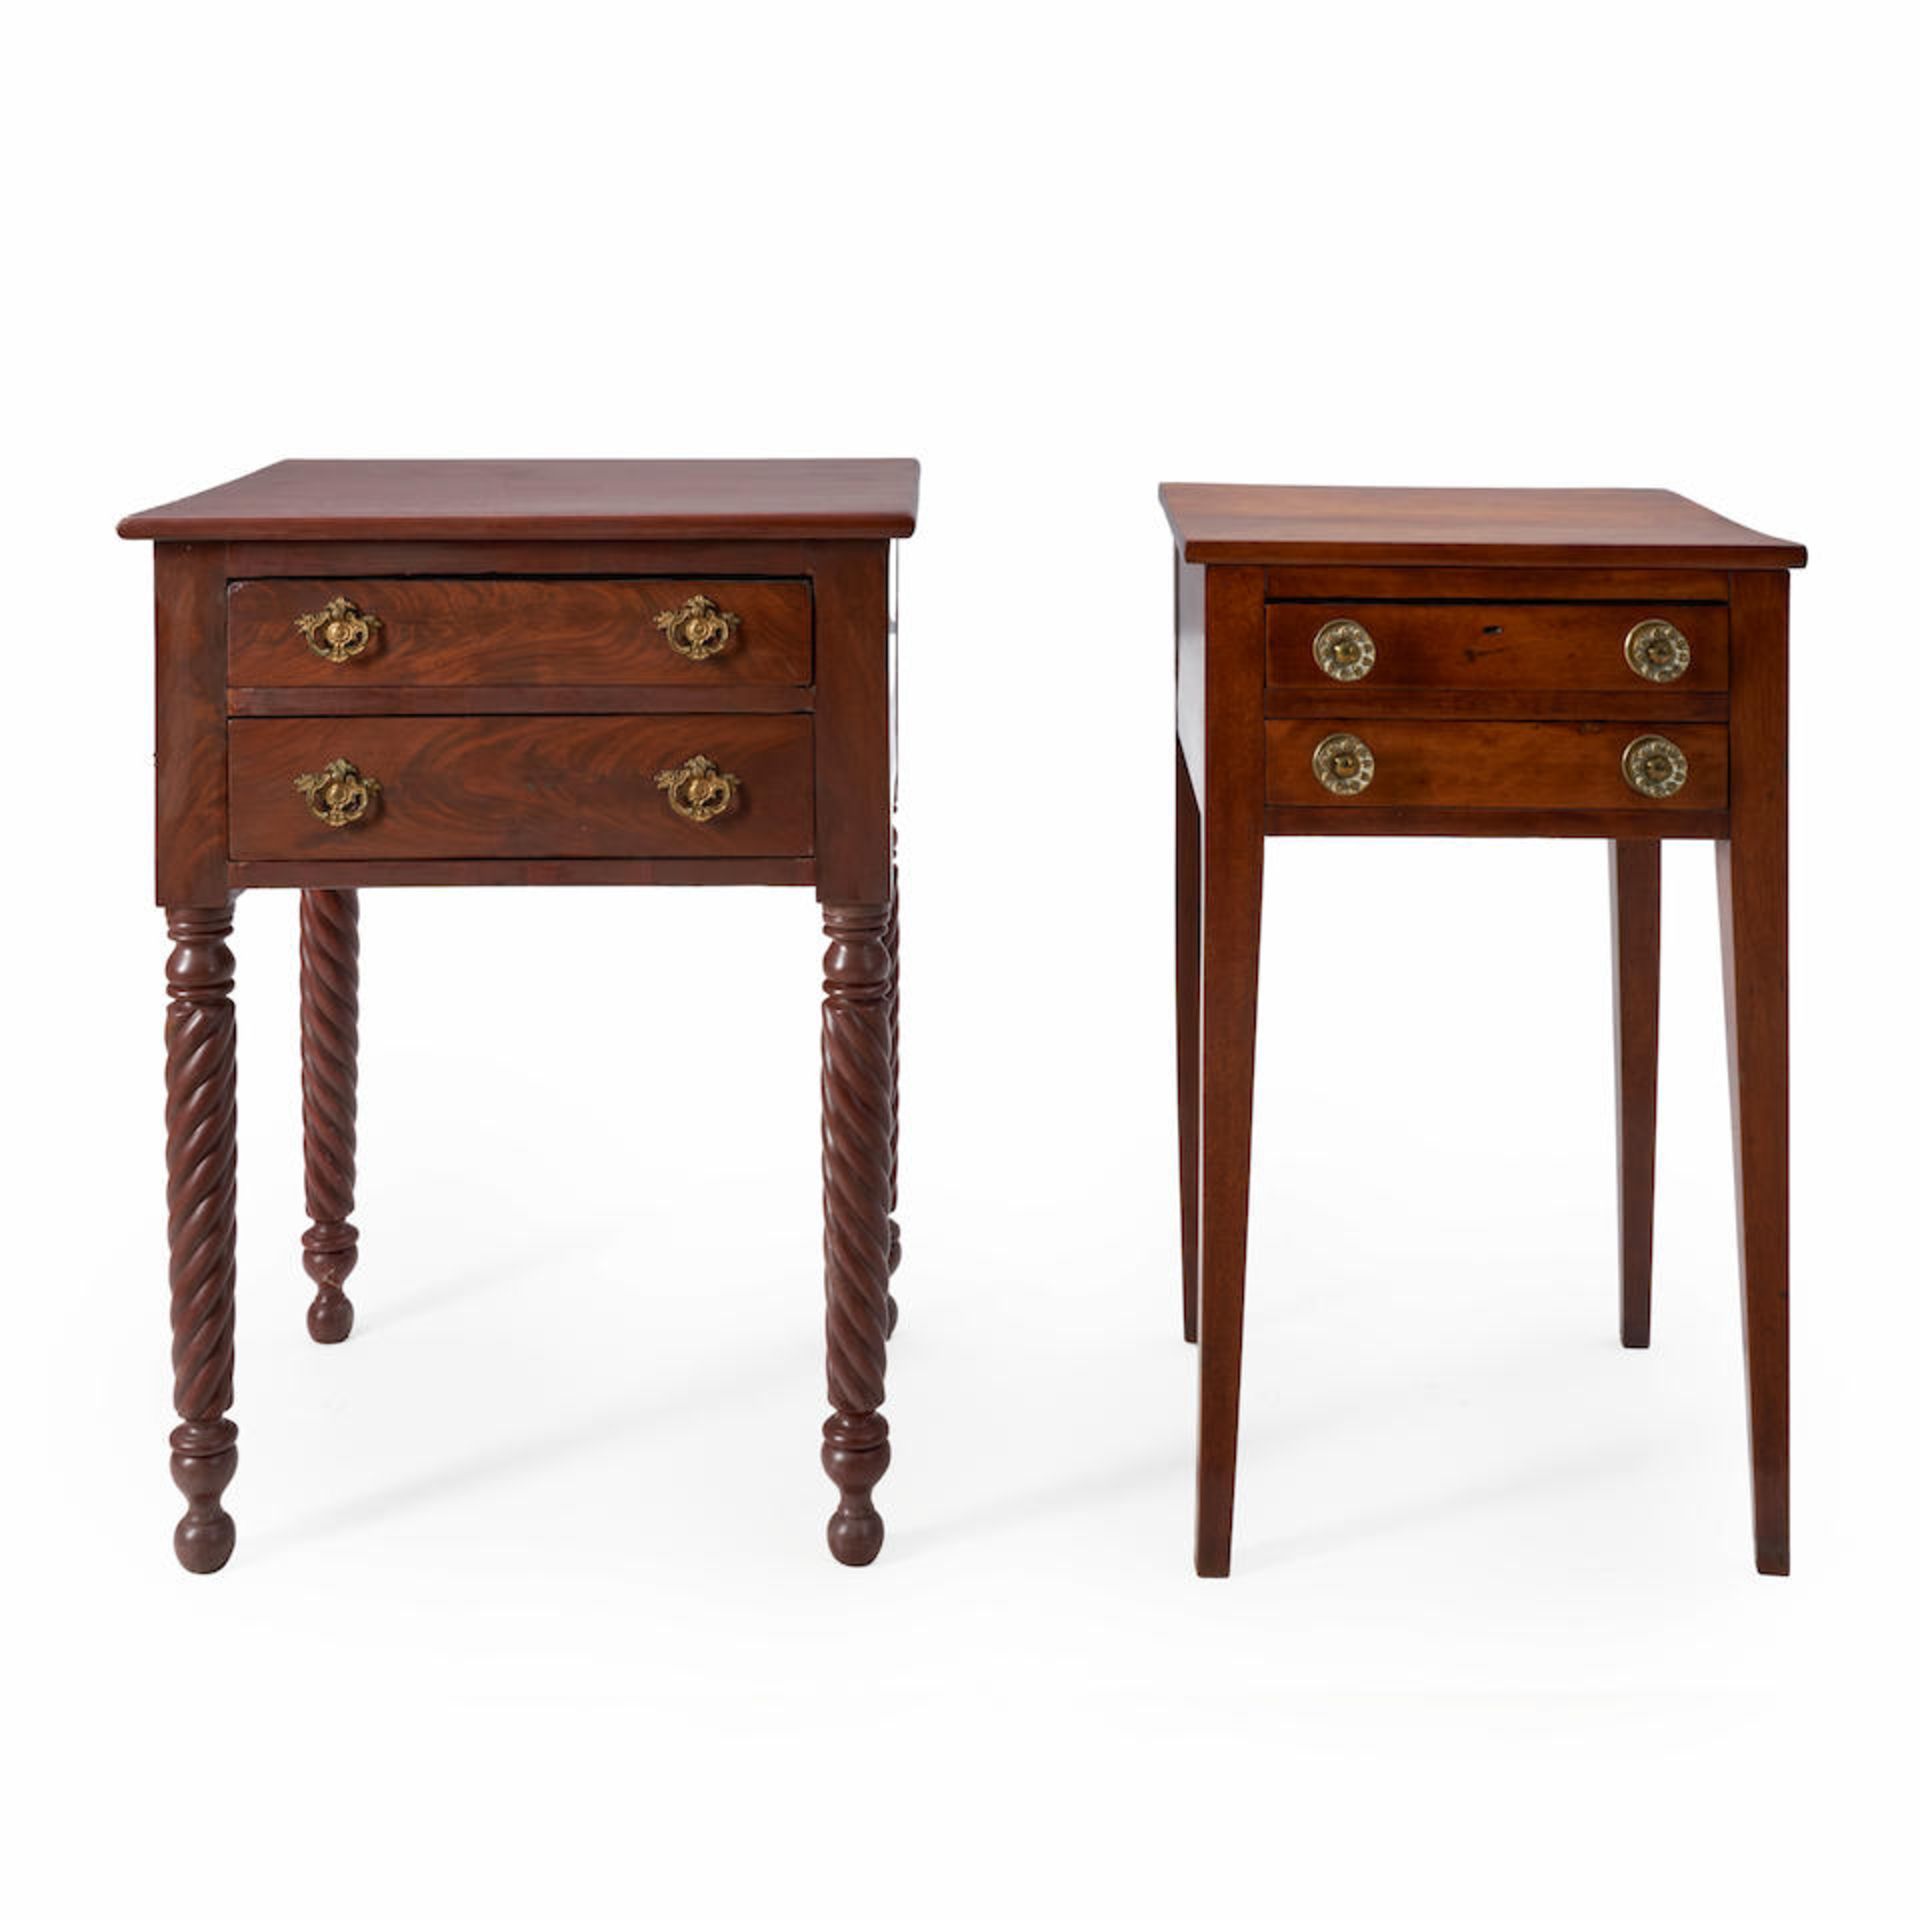 TWO MAHOGANY TWO-DRAWER WORK TABLES